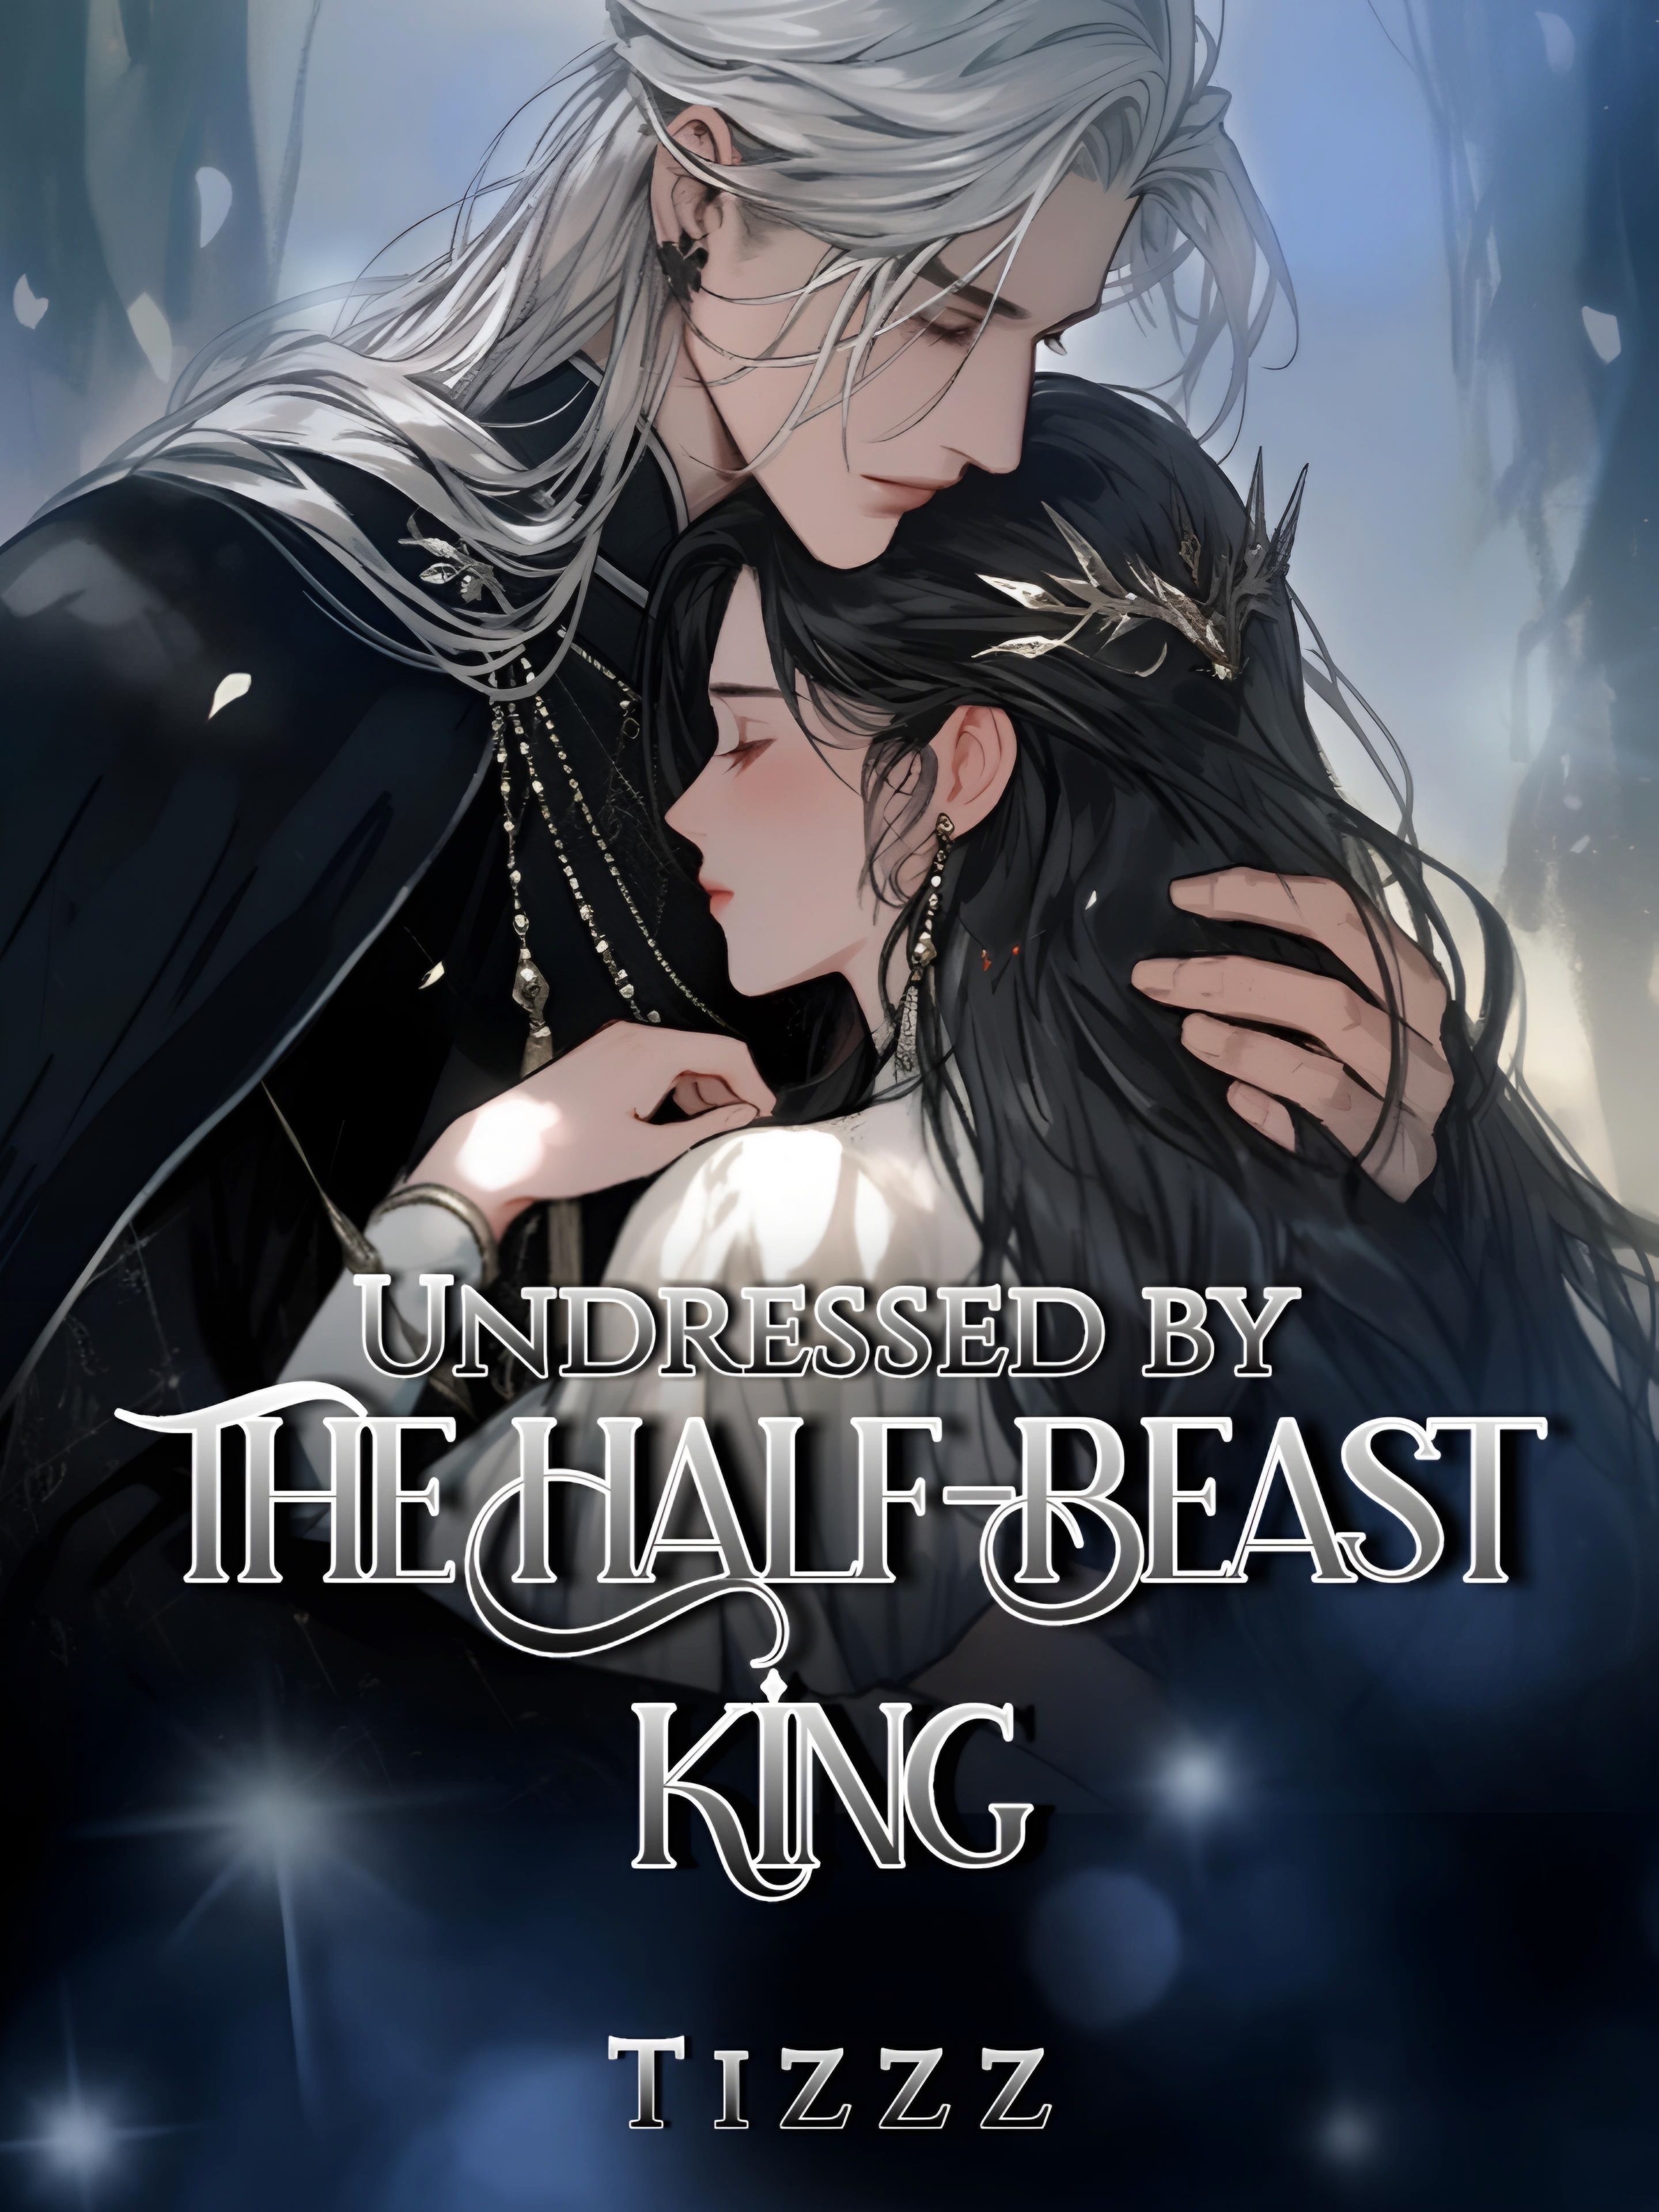 Undressed by the Half-beast King